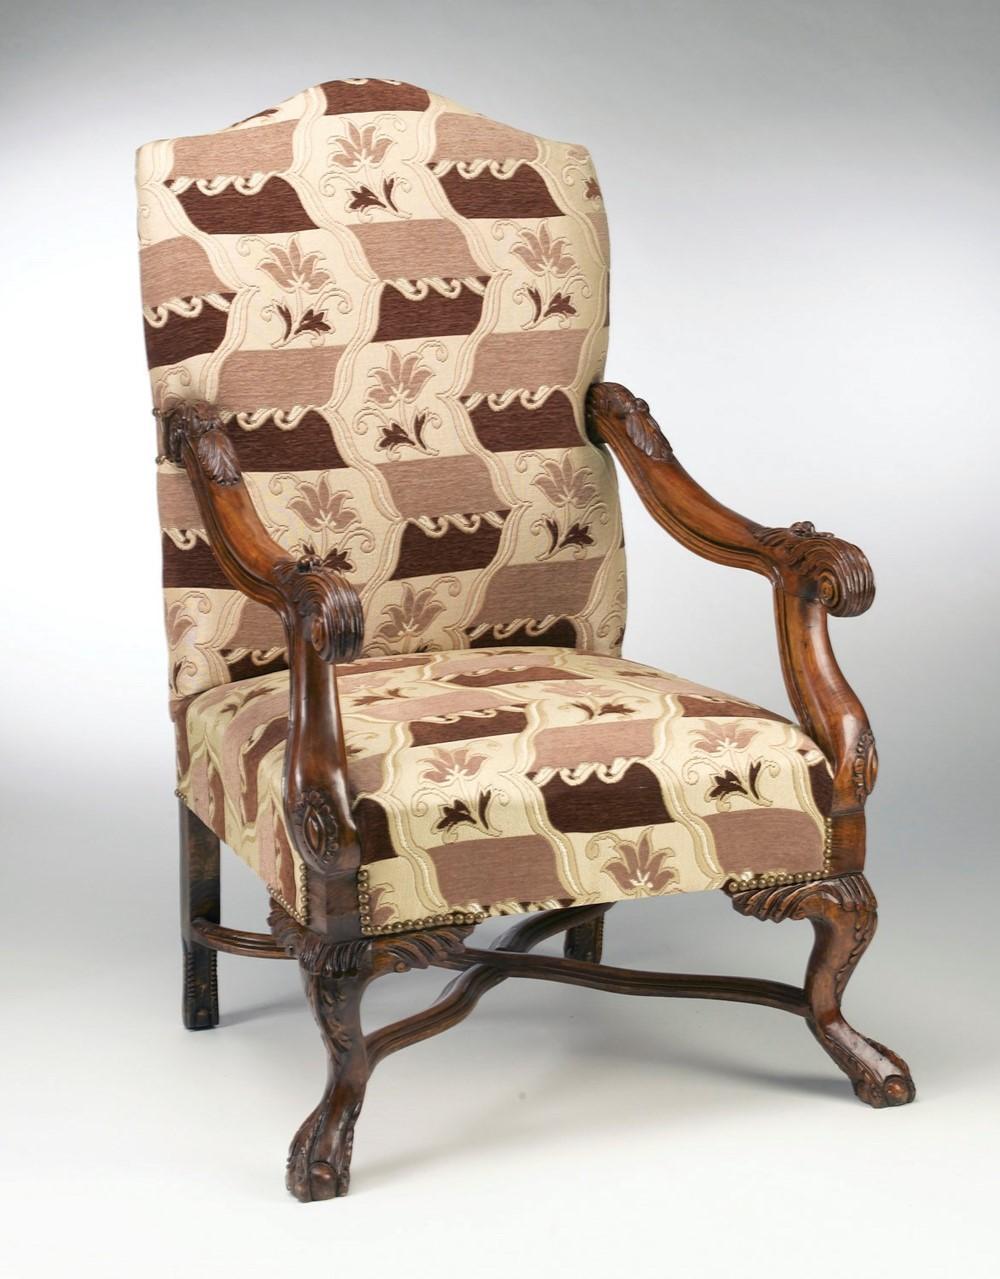 Classic, Traditional Arm Chairs 73049 AA- 73049-ACH-Set-2 in Multi-Color Patterned, Brown, Beige Fabric